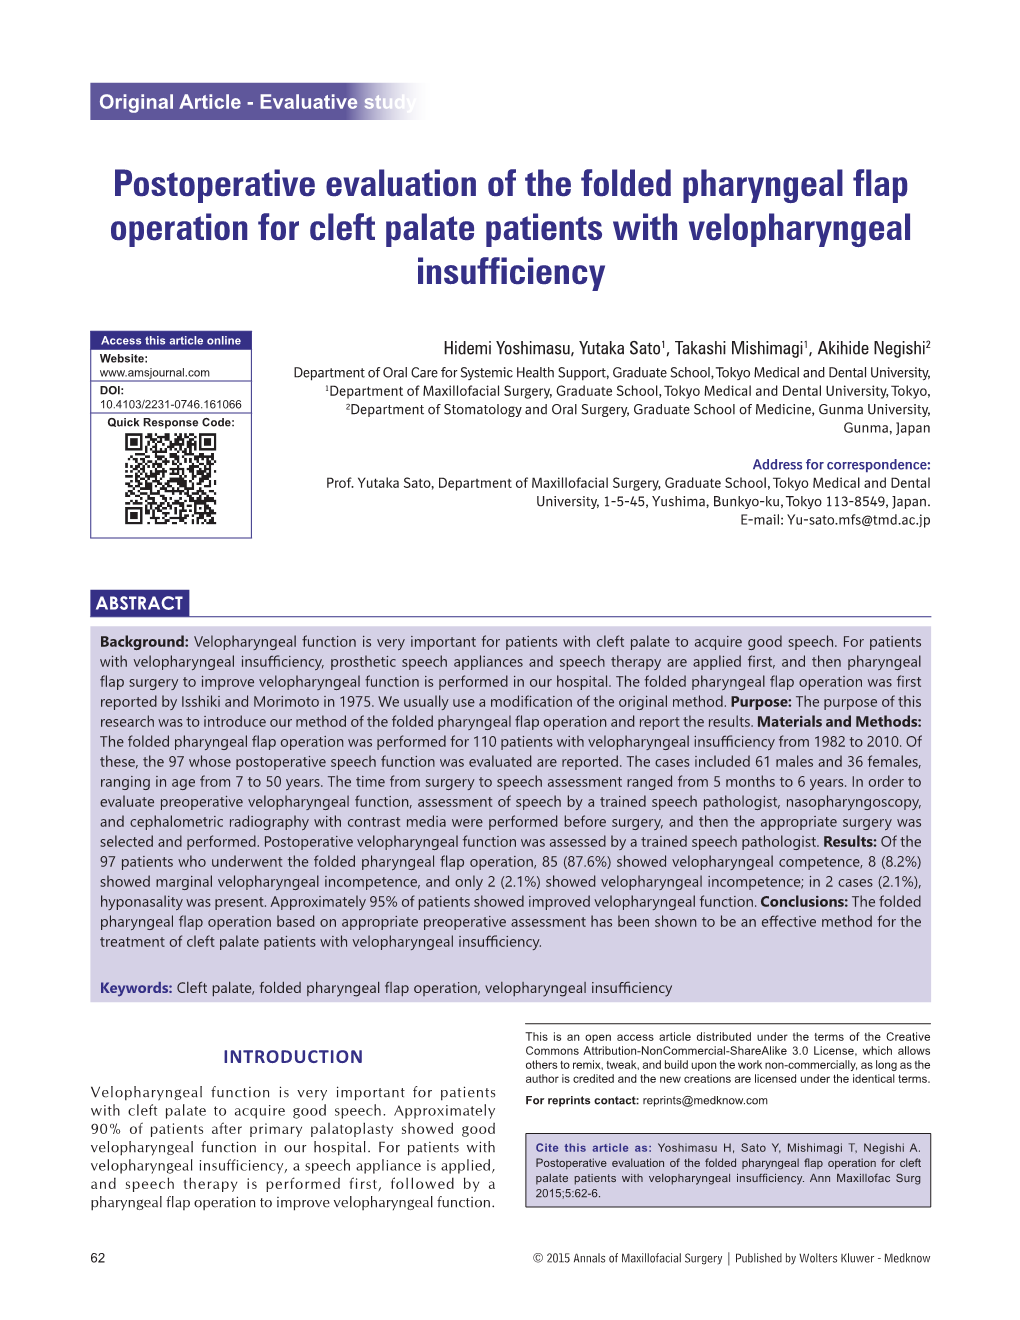 Postoperative Evaluation of the Folded Pharyngeal Flap Operation for Cleft Palate Patients with Velopharyngeal Insufficiency